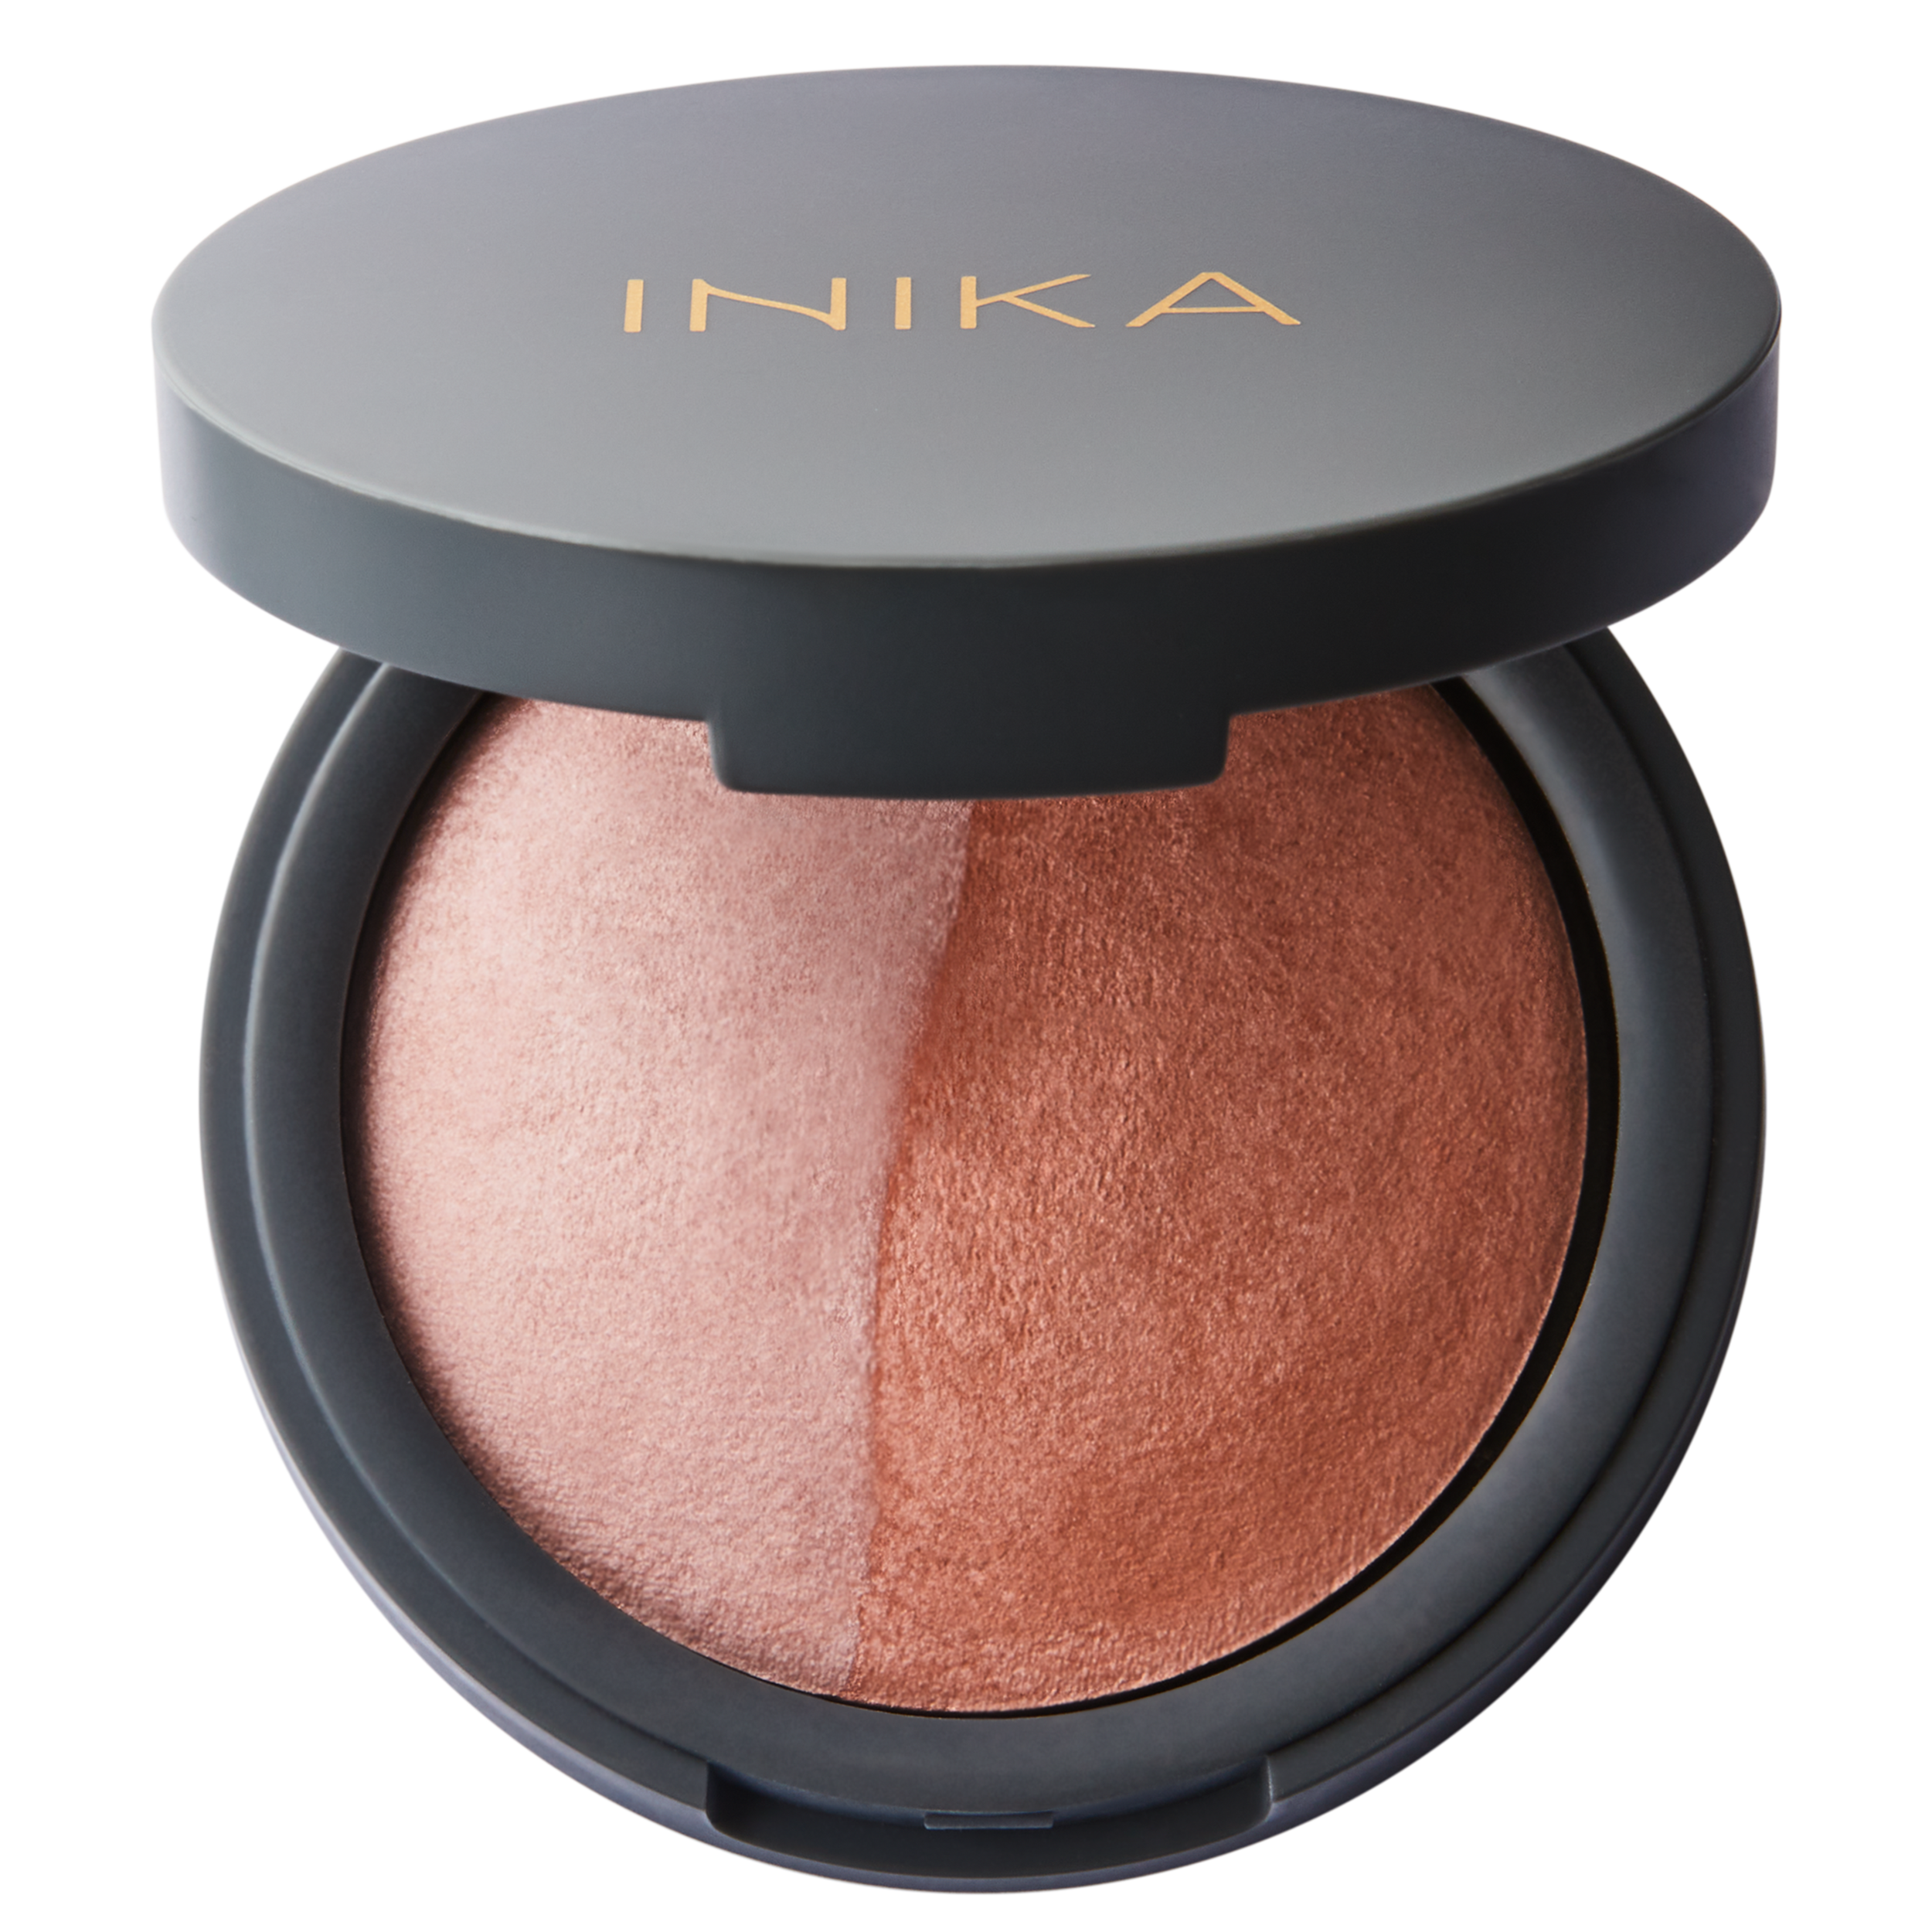 INIKA Organic Mineral Baked Blush Duo in Pink Tickle